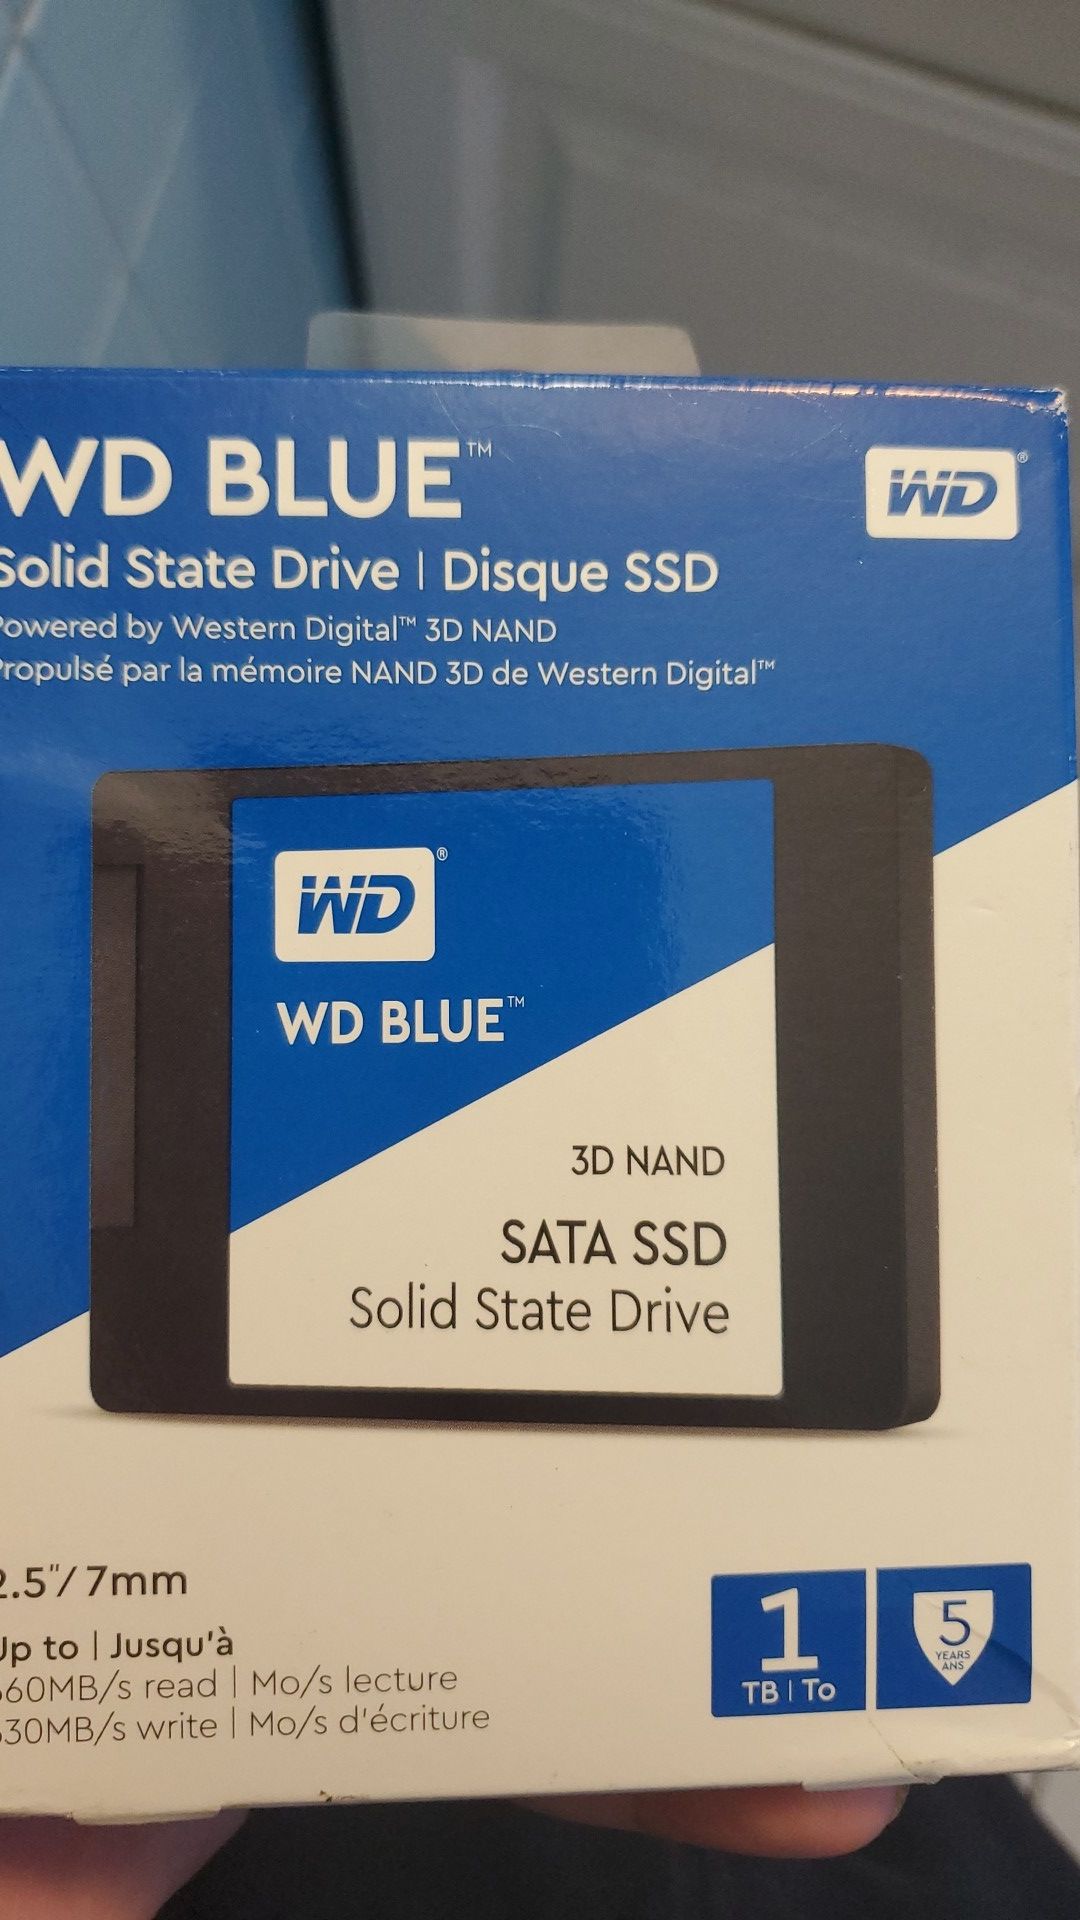 Wd blue 1tb solid state drive